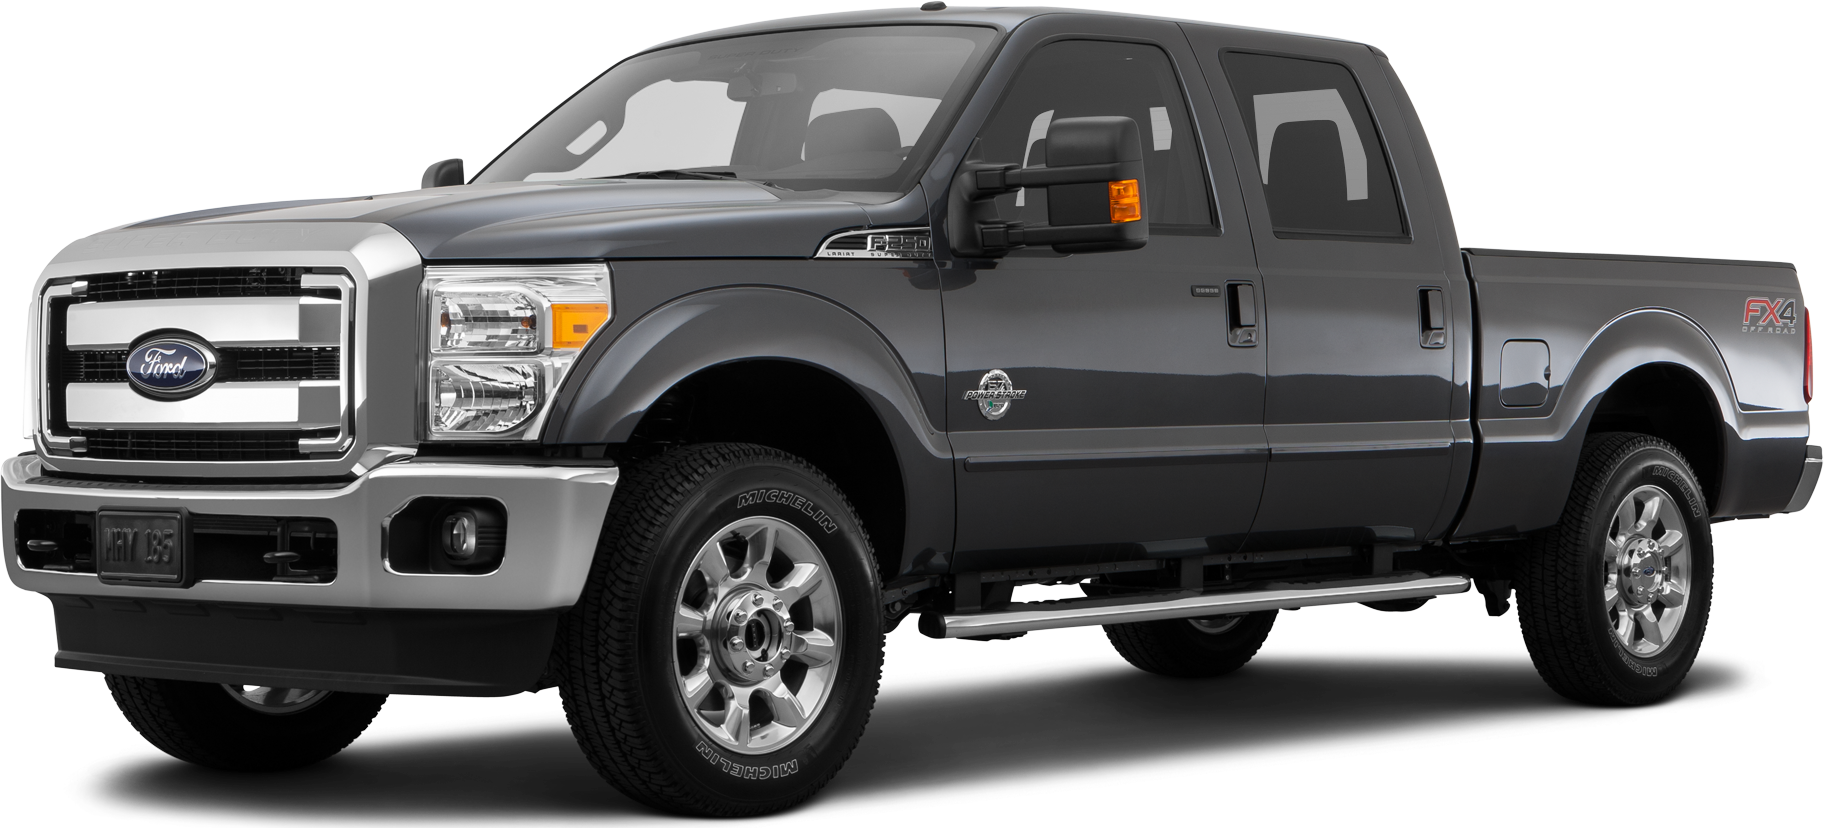 2015 Ford F250 Super Duty Crew Cab Price Value Ratings And Reviews